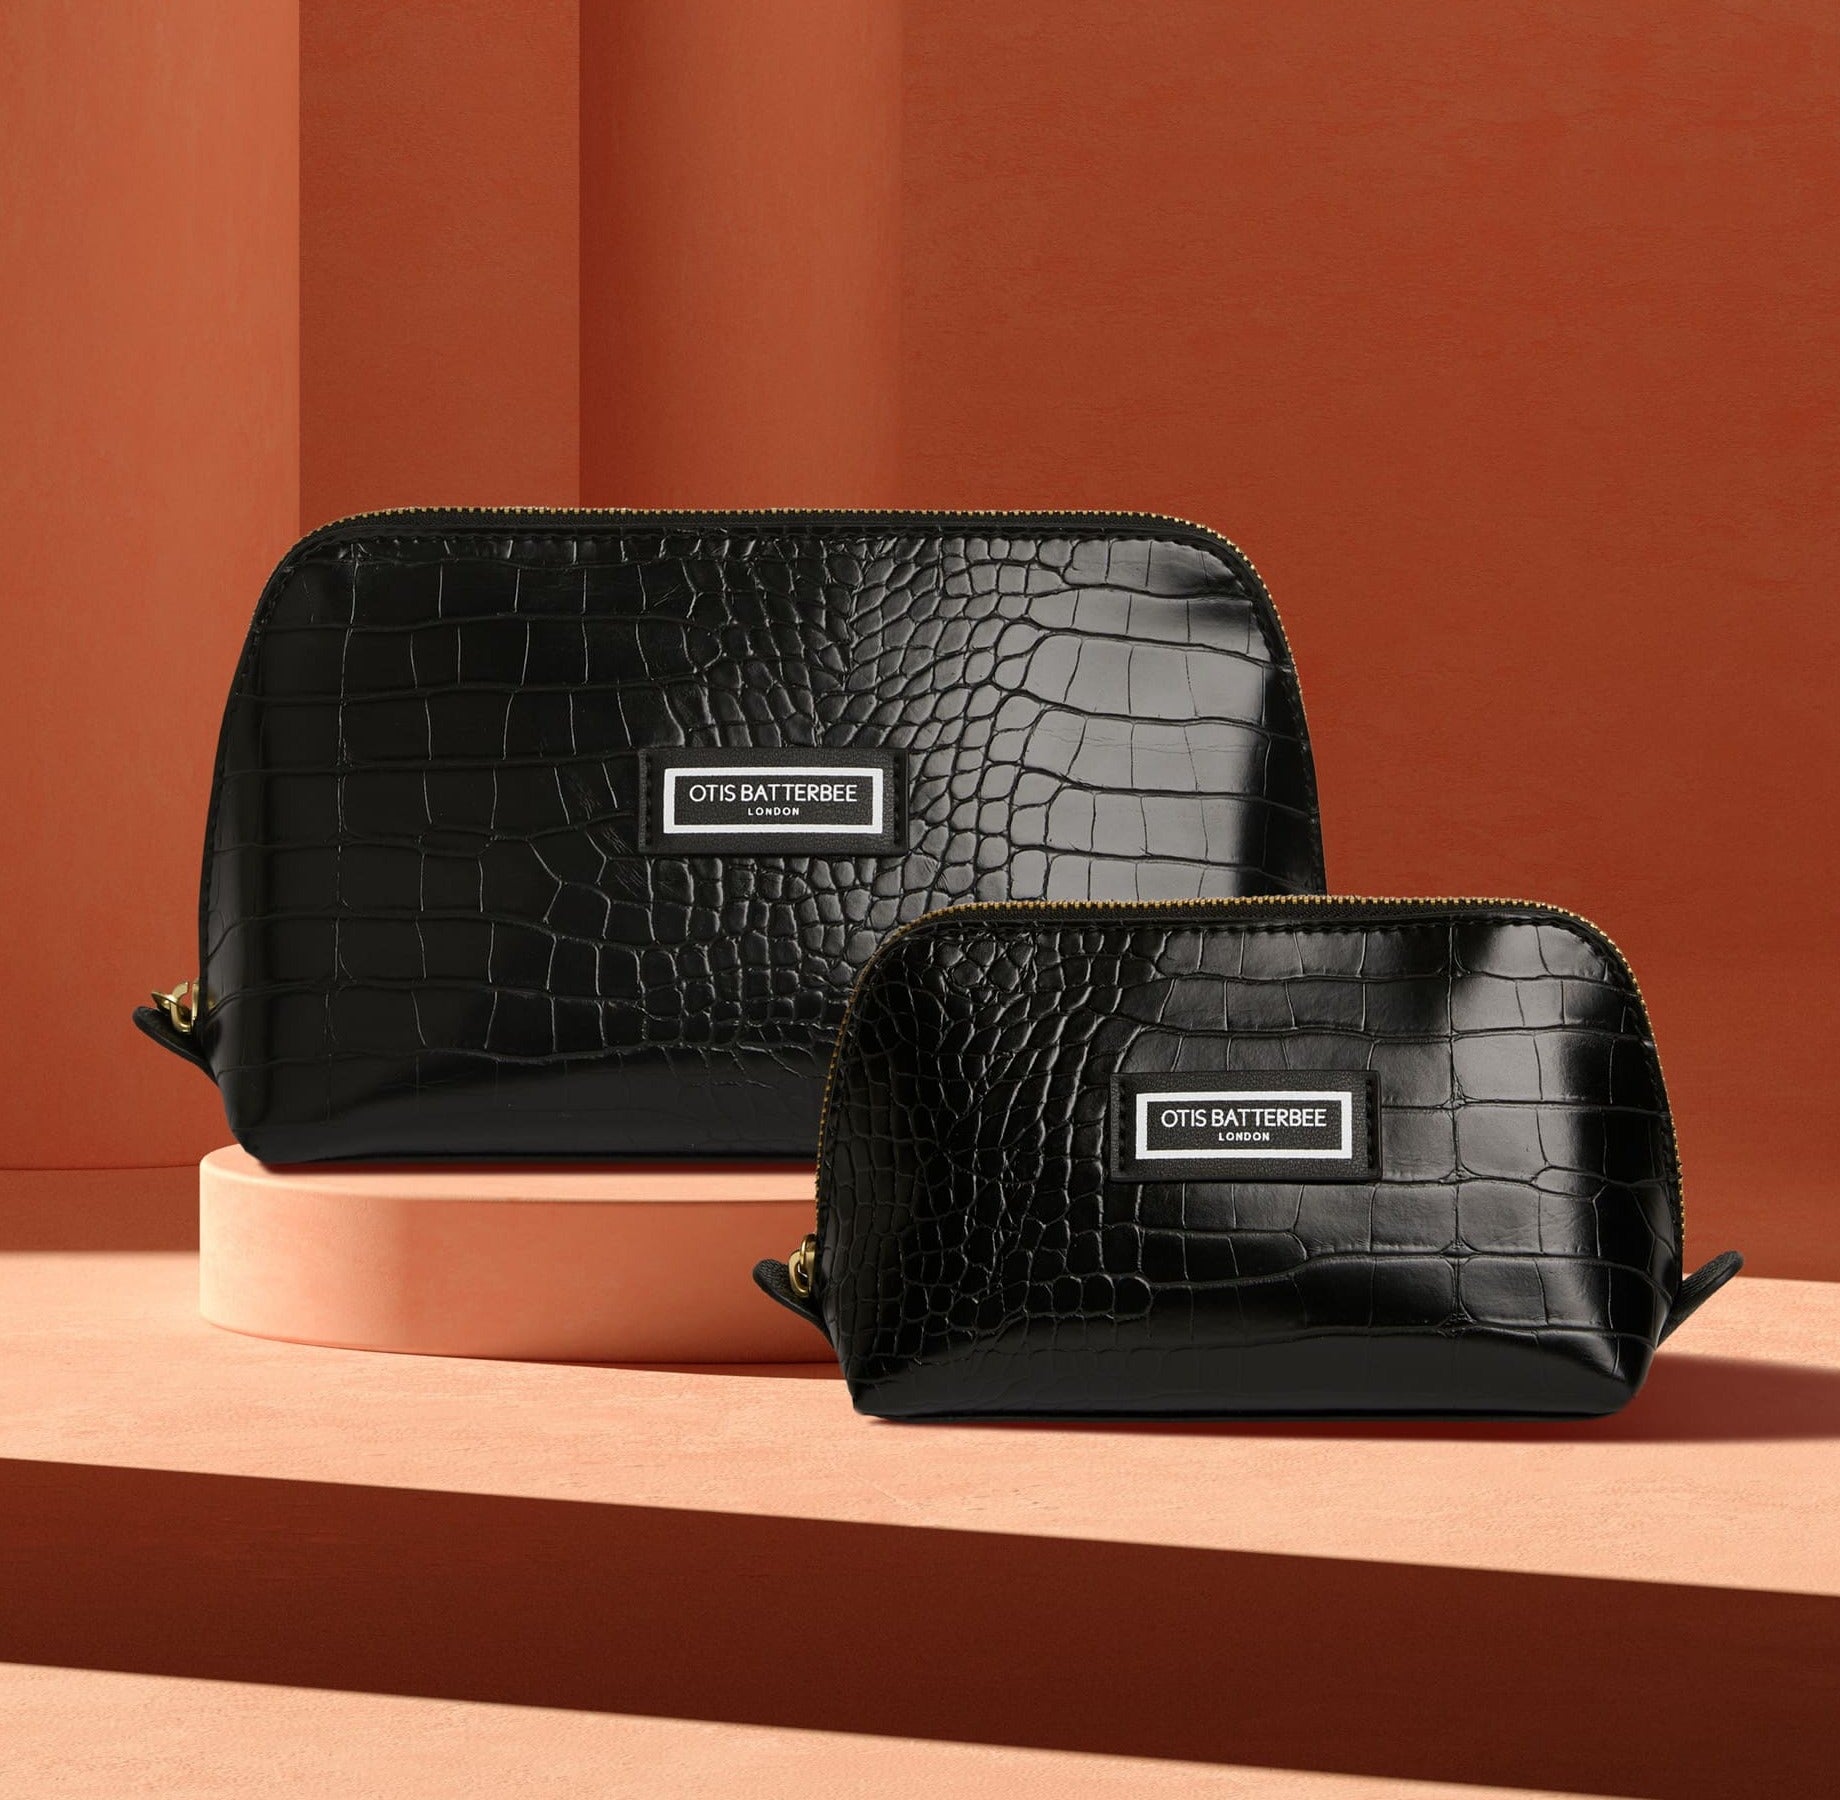 Otis Batterbee Makeup Bag Duo – Rigid construction means your beauty products are safe from damage and stay perfect every time.